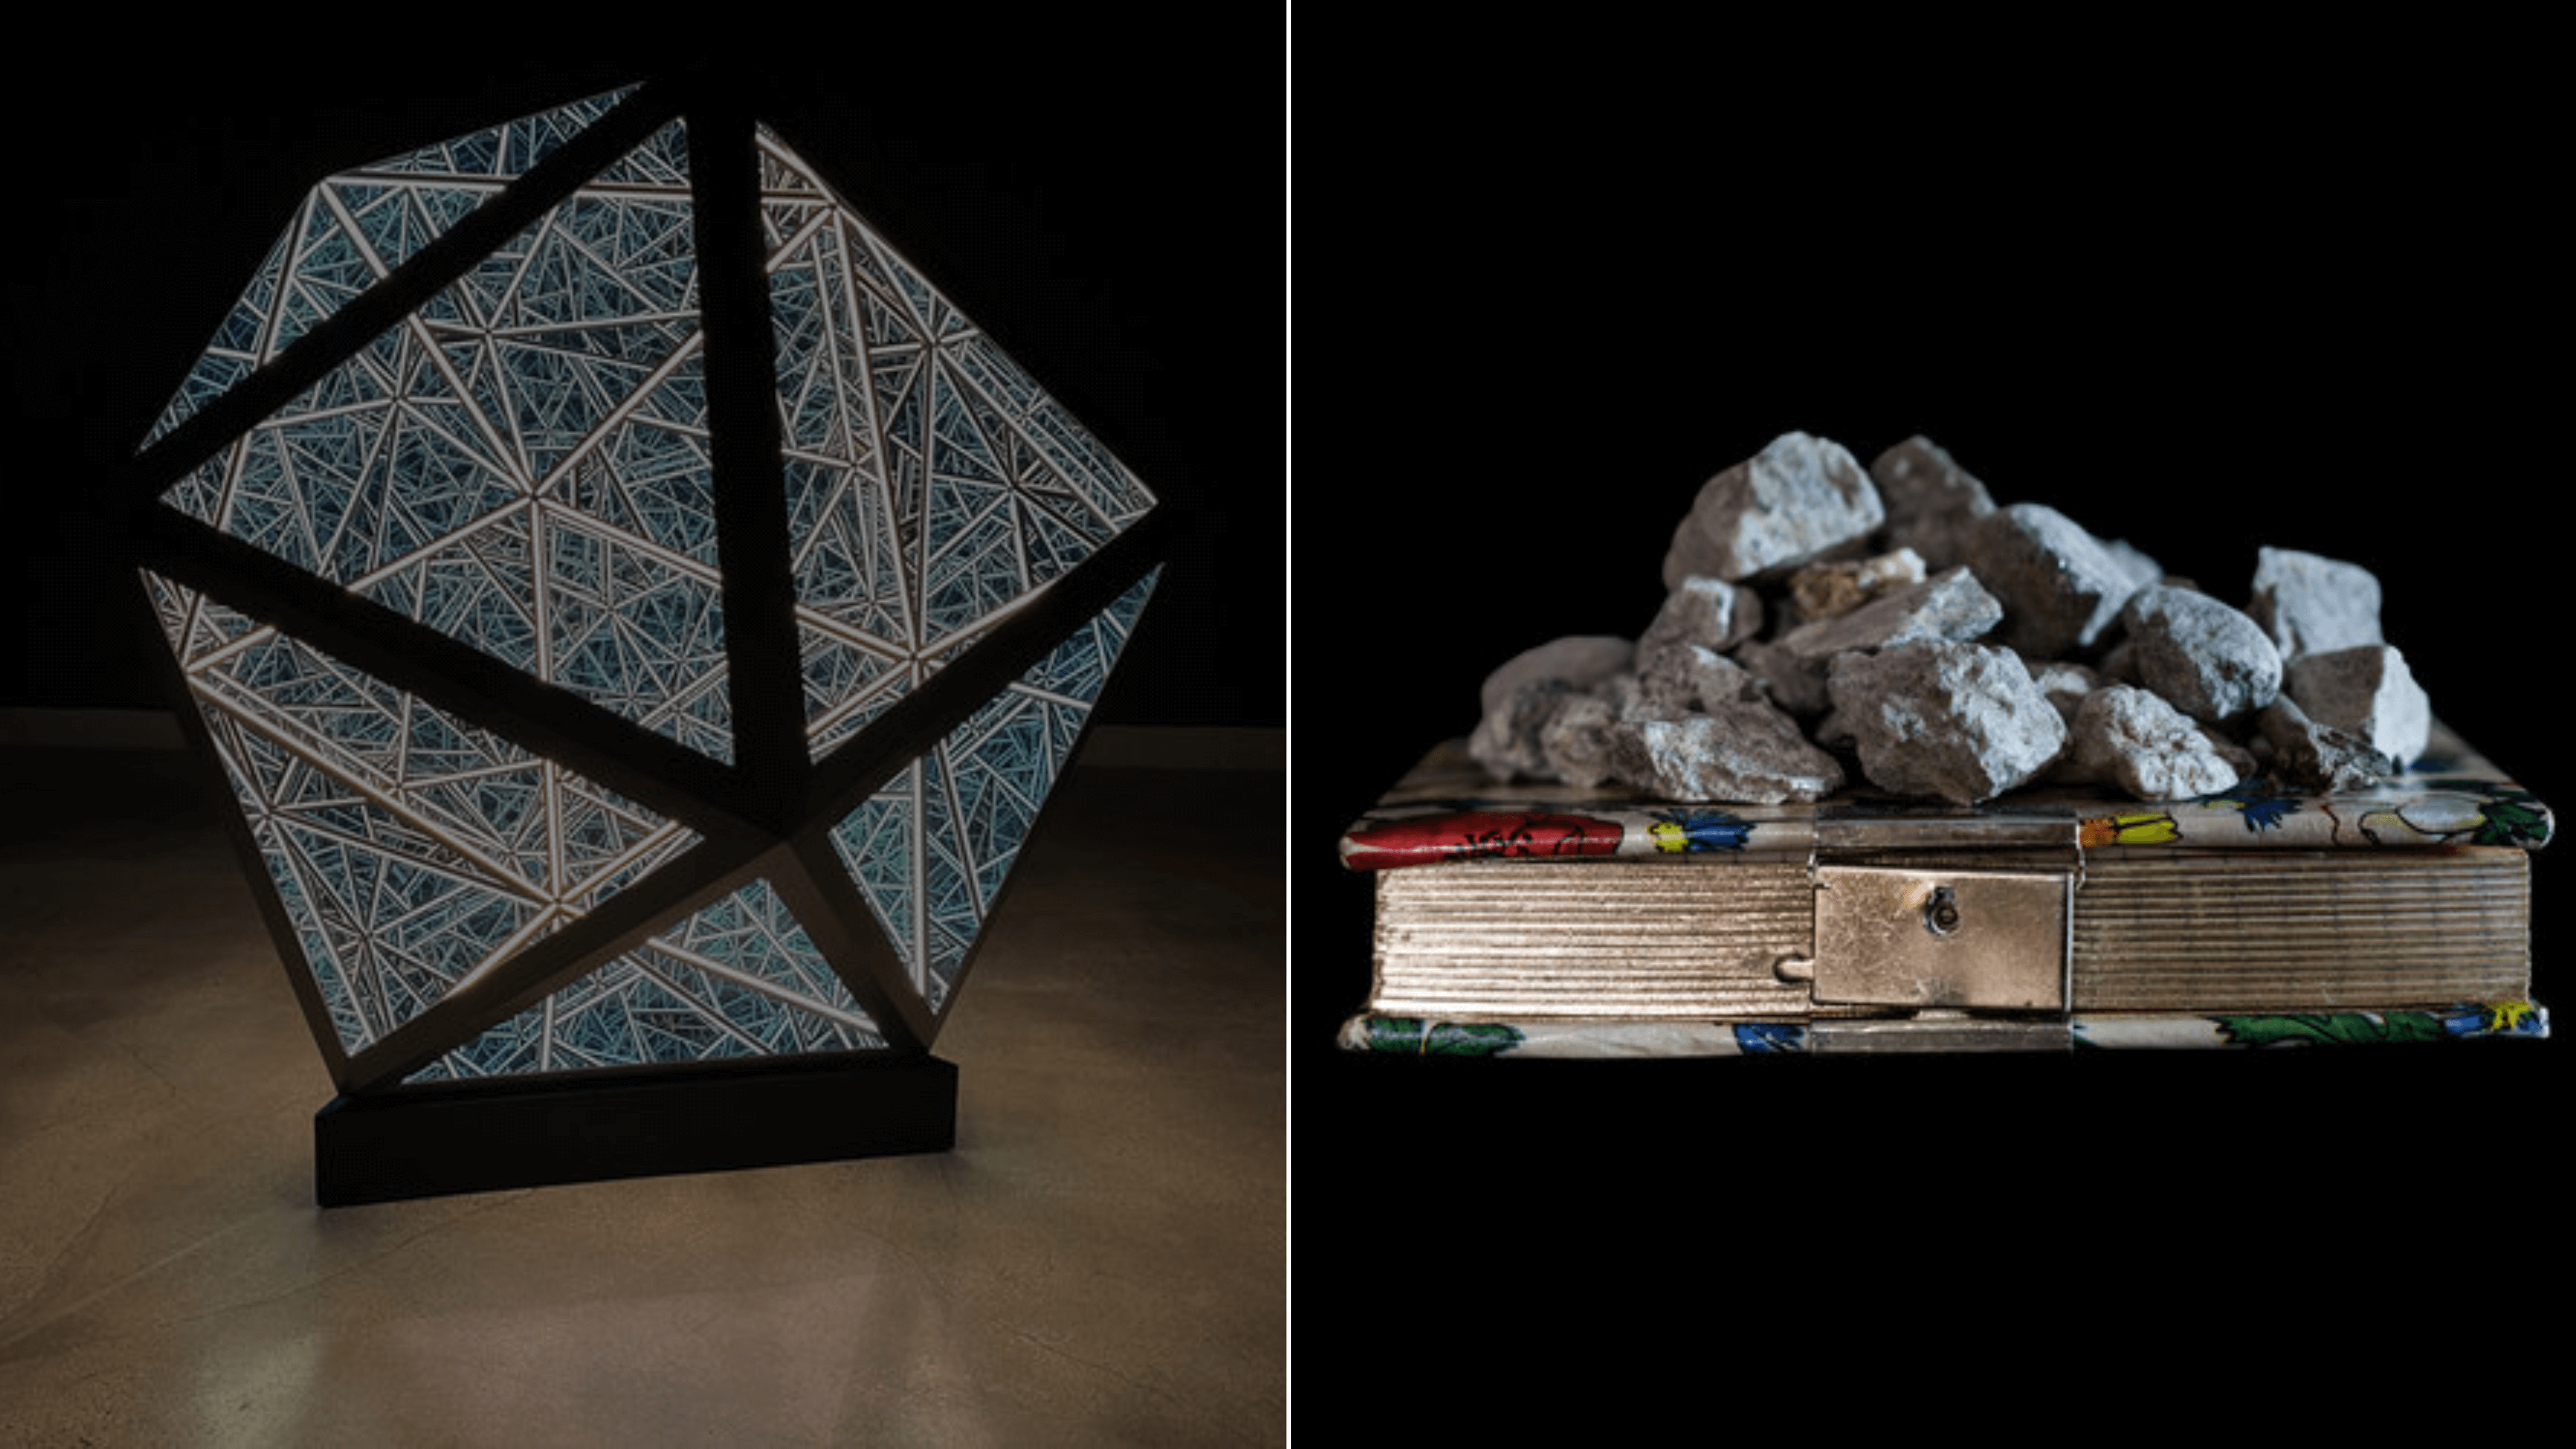 on the left a photo of a sculpture that looks like a prism and on the right a piece made of a journal with rocks on top of it